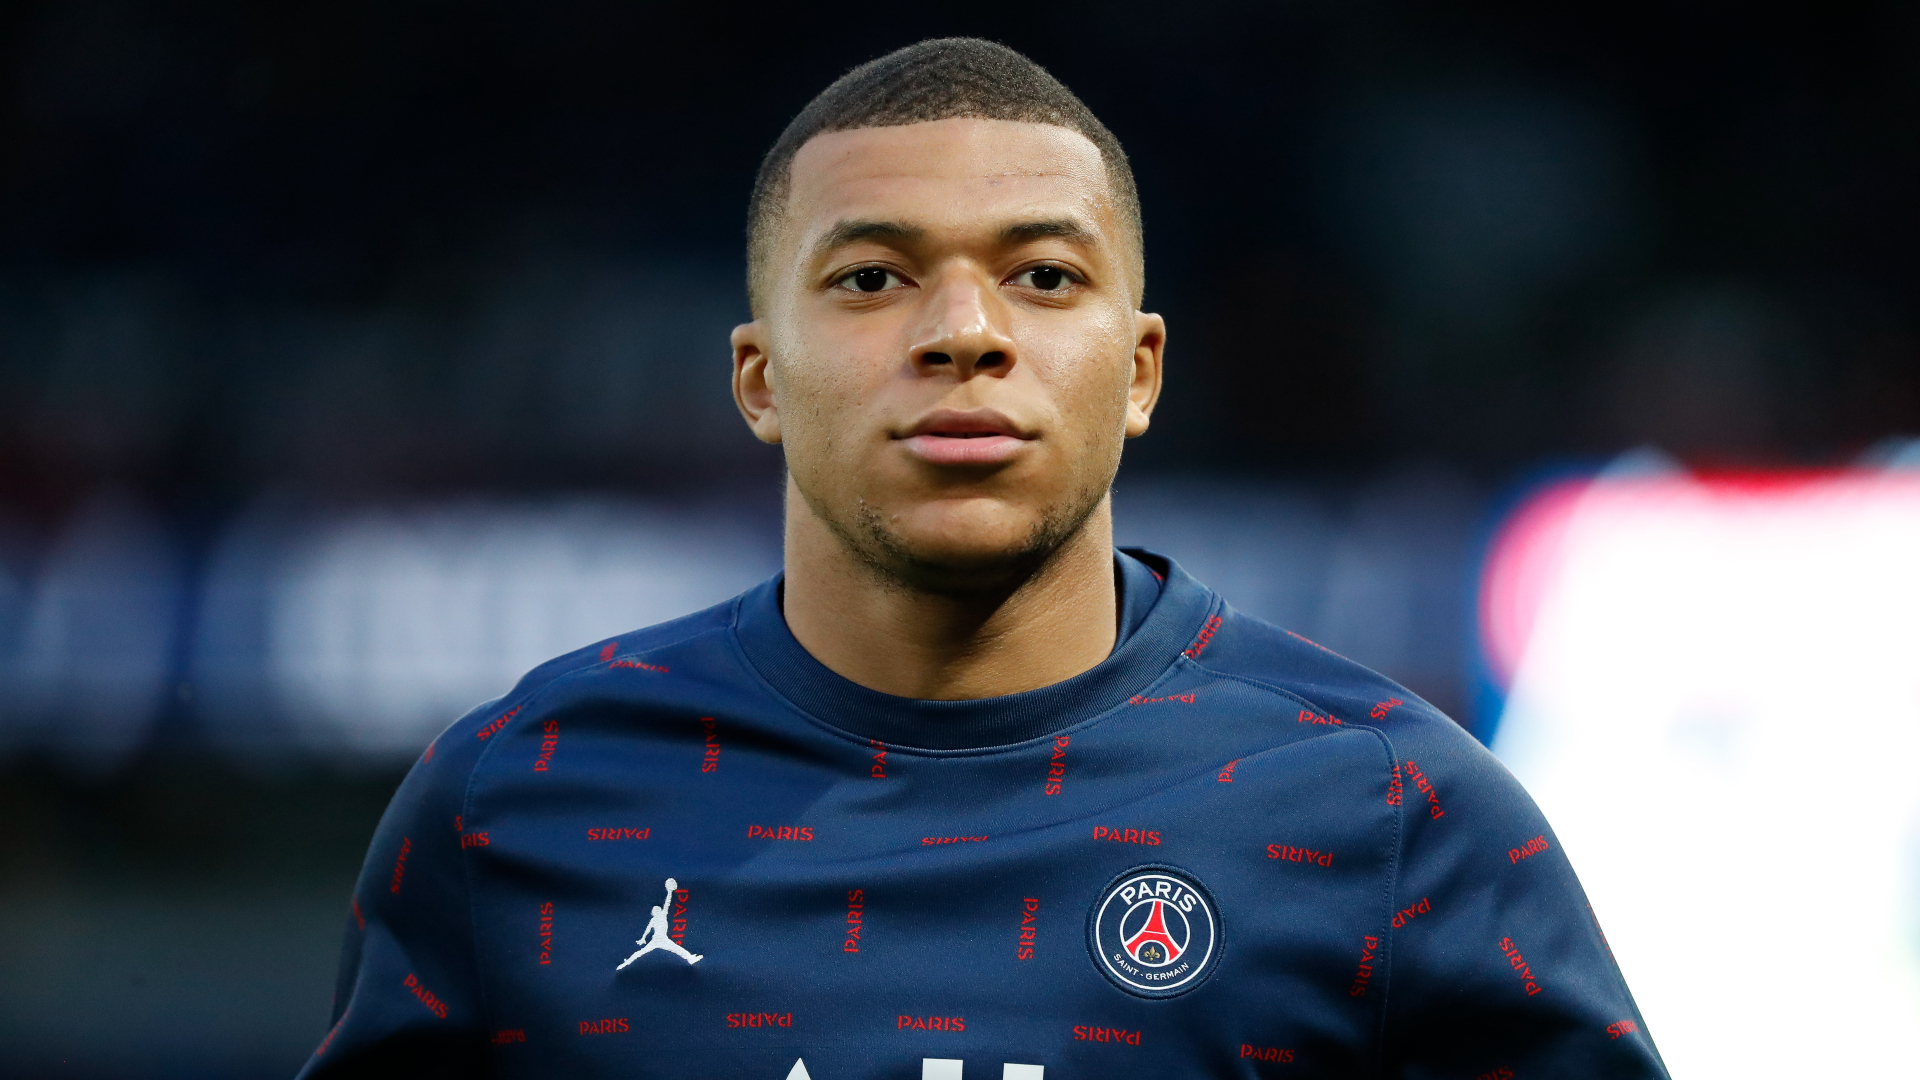 Top 10 Highest Paid Footballers In The World Kylian Mbappe - Top 10 Highest-Paid Footballers In The World (2023)